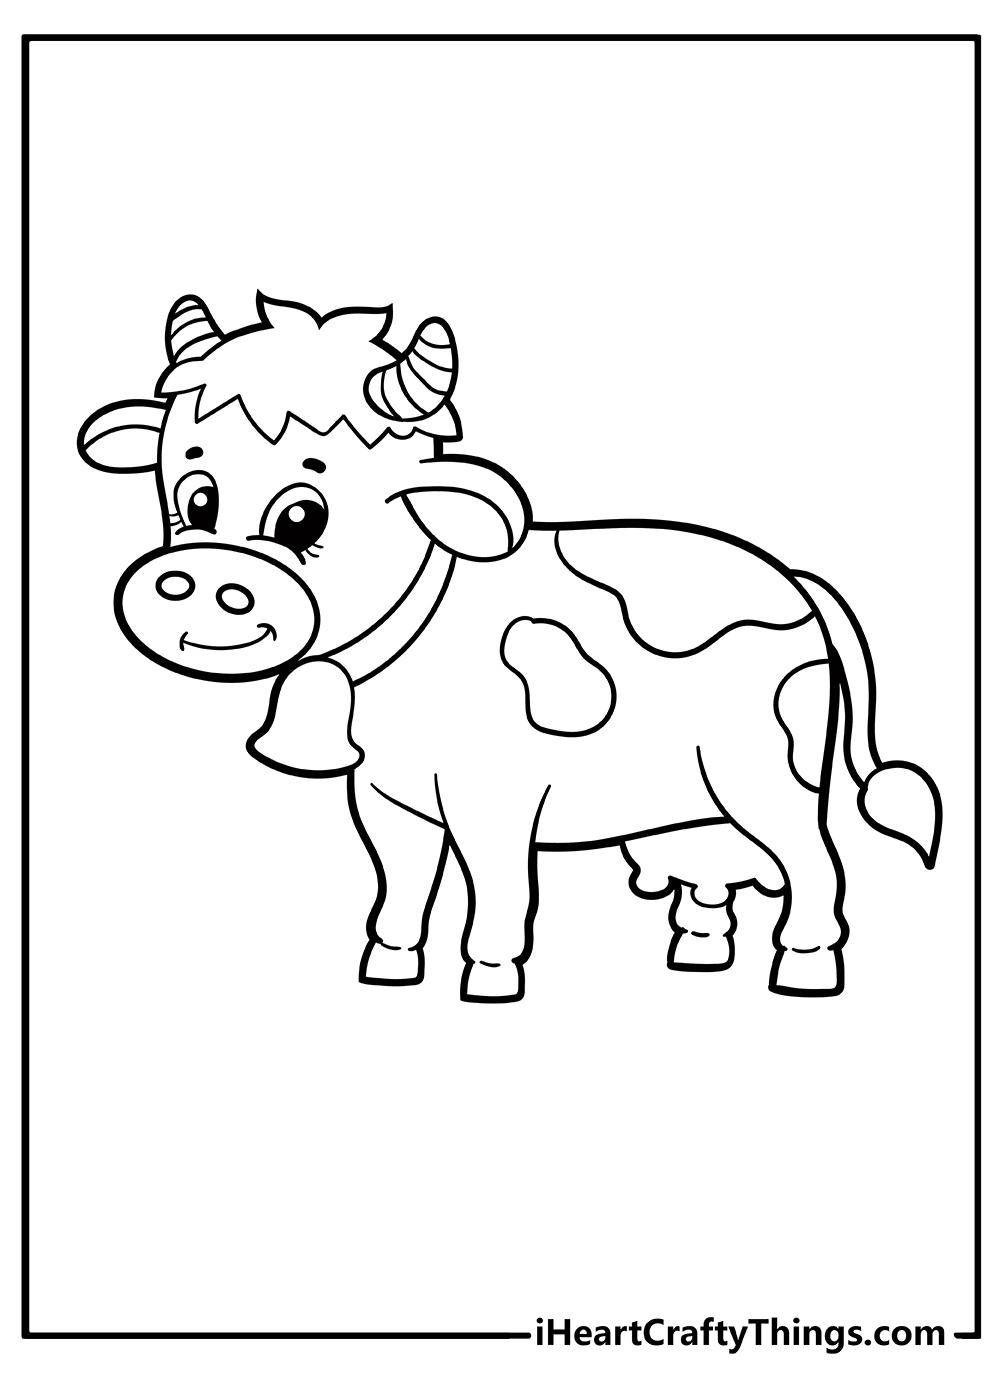 Printable Cow Coloring Pages Updated 21